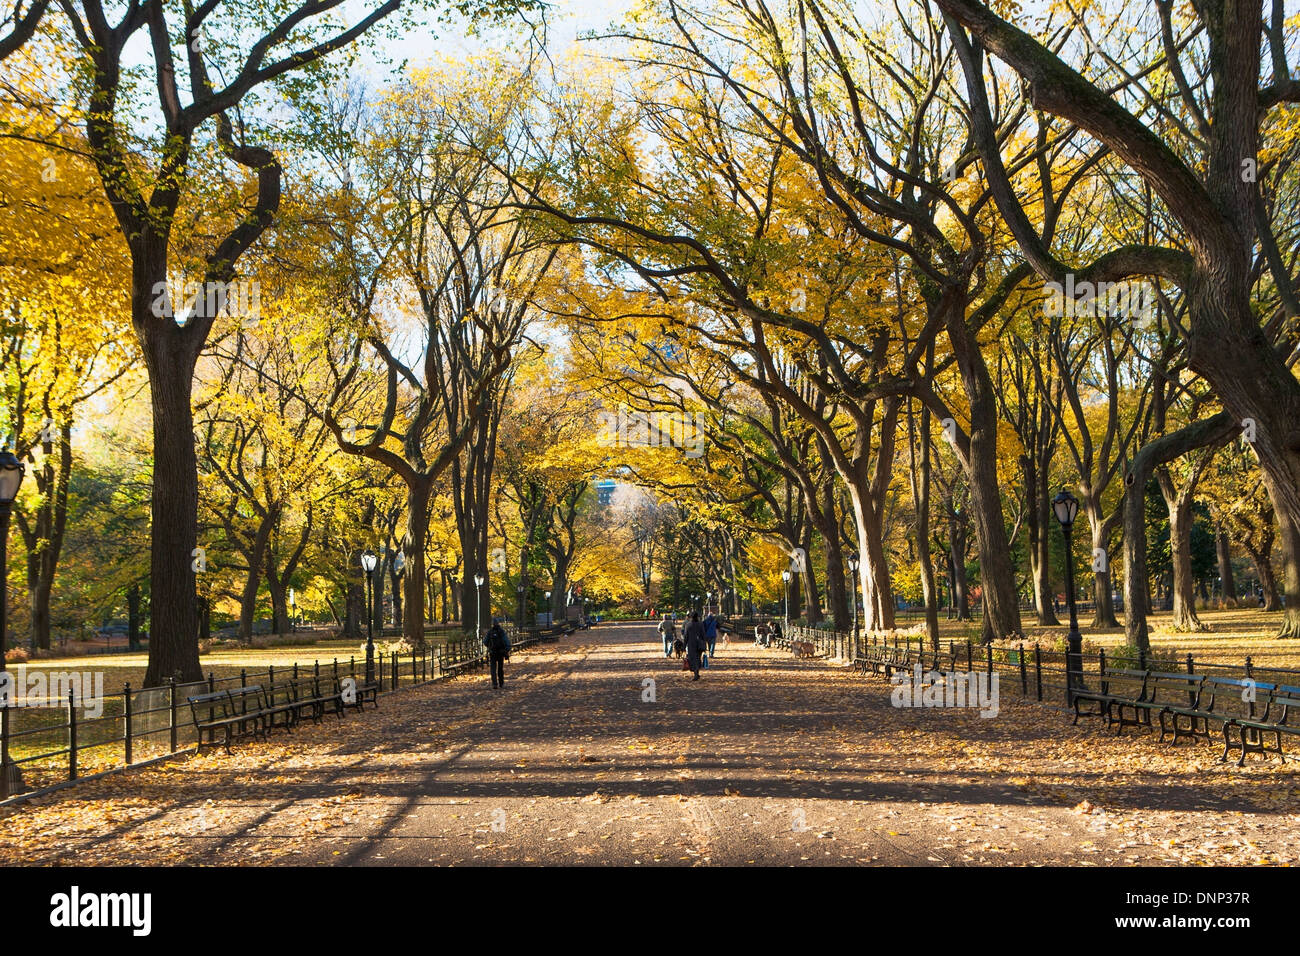 USA, New York State, New York City, Alley in Central Park in autumn Stock Photo